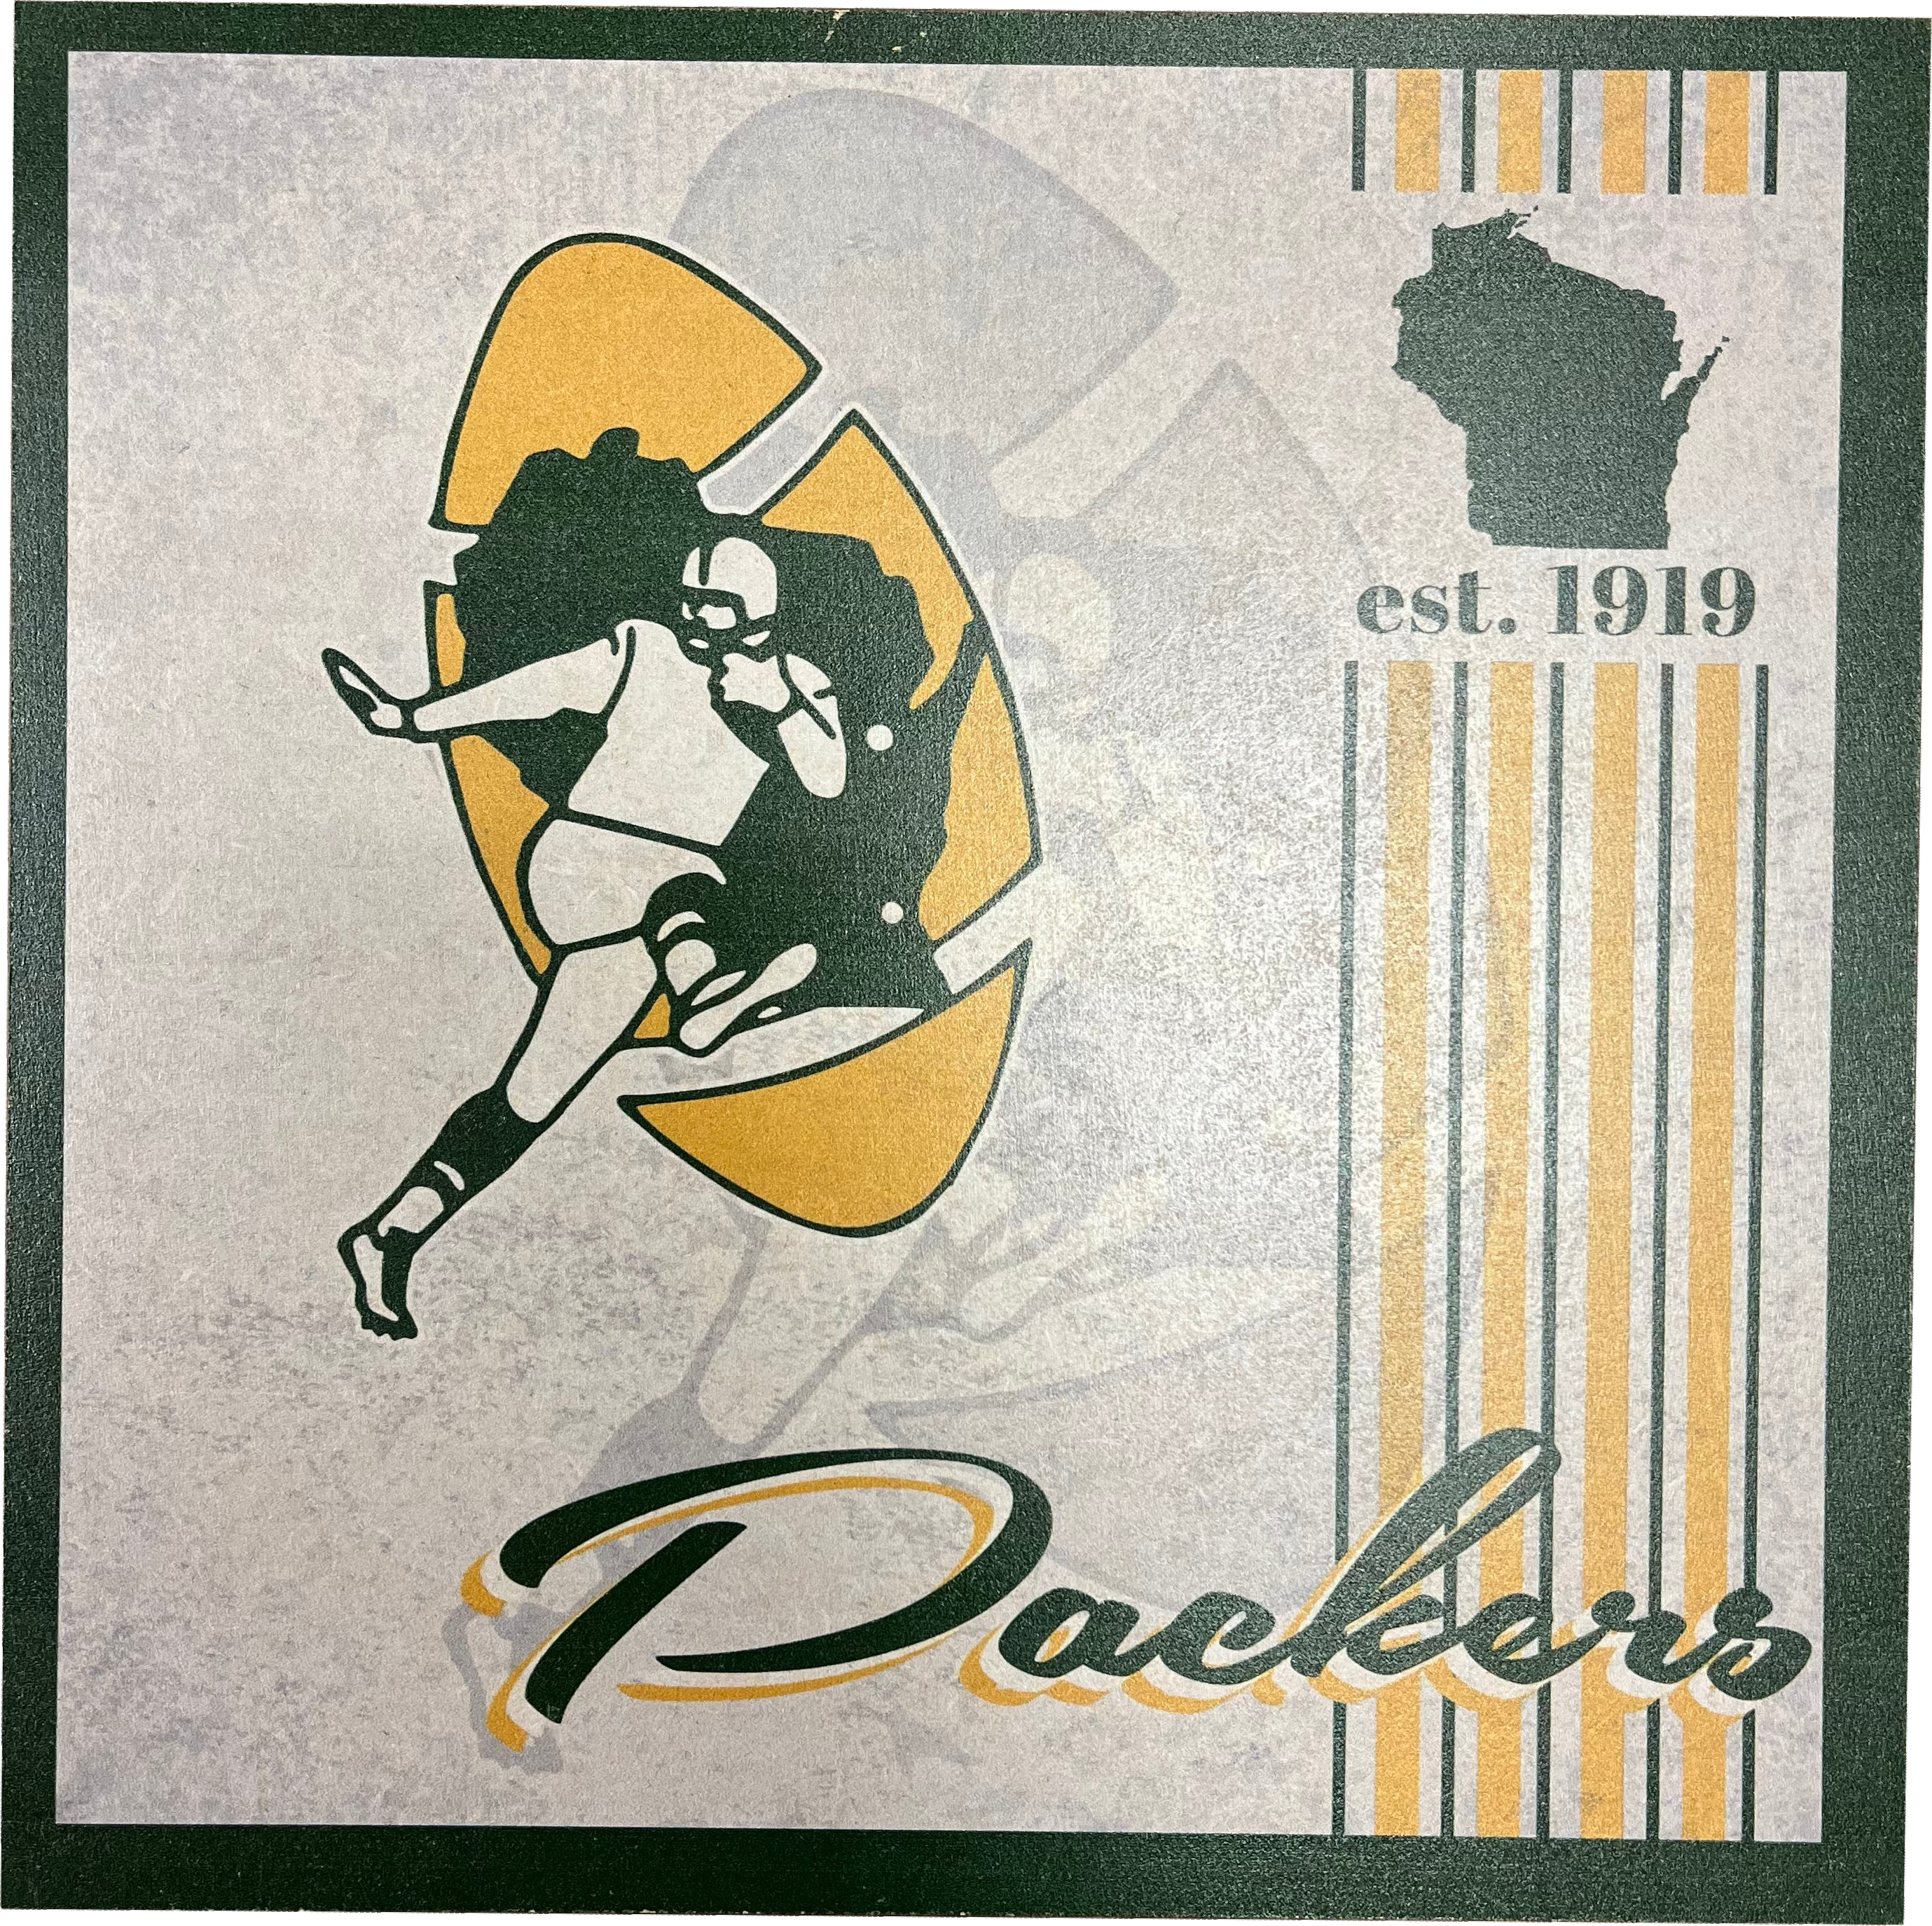 throwback packers logo